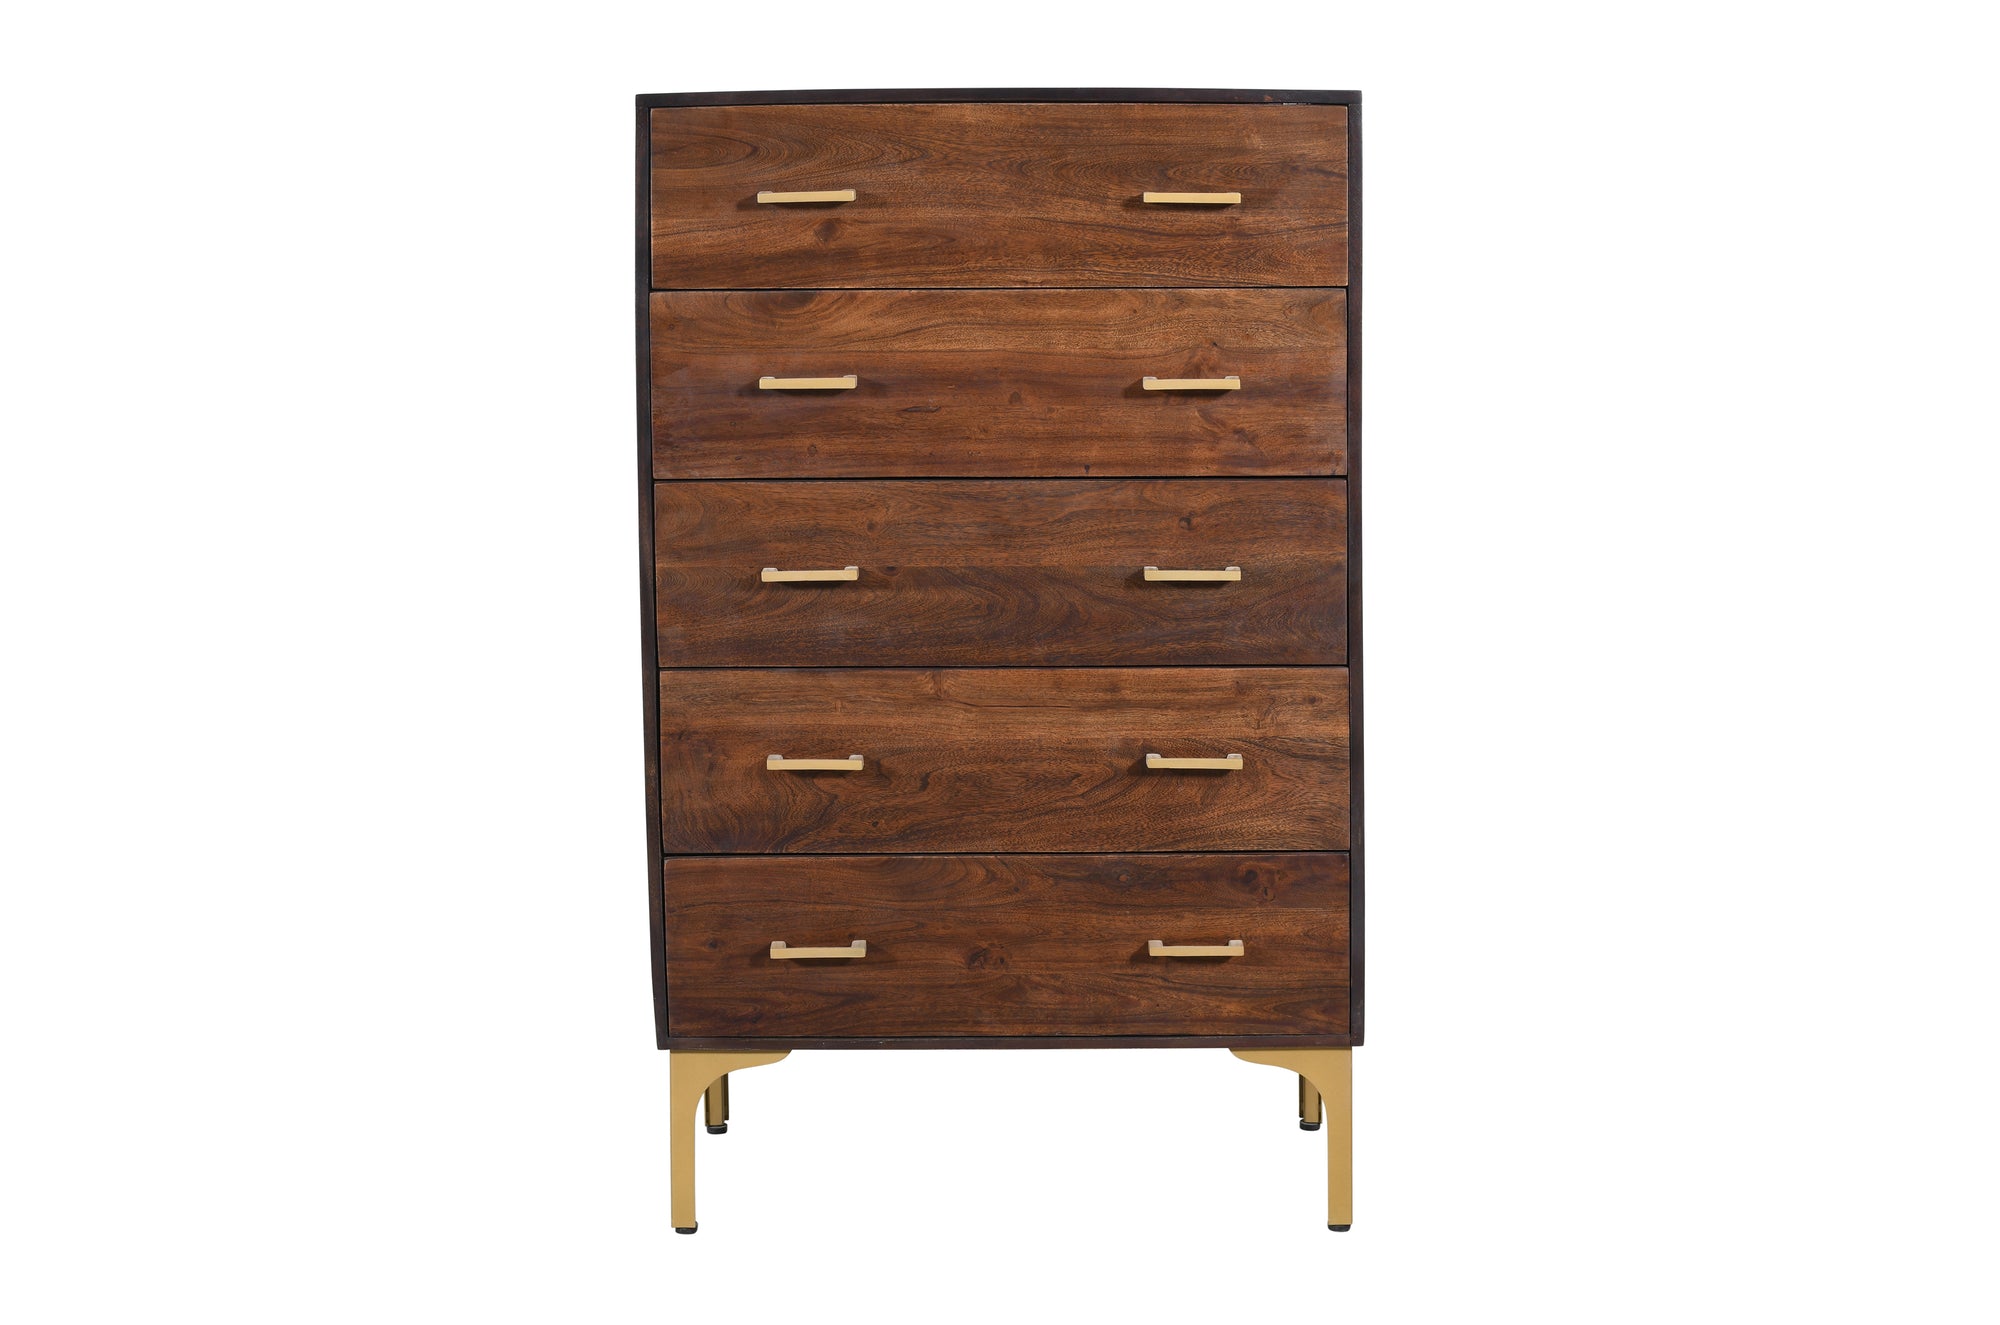 ADAMA-5 drawers Solid Acacia Wood Chest -Brown